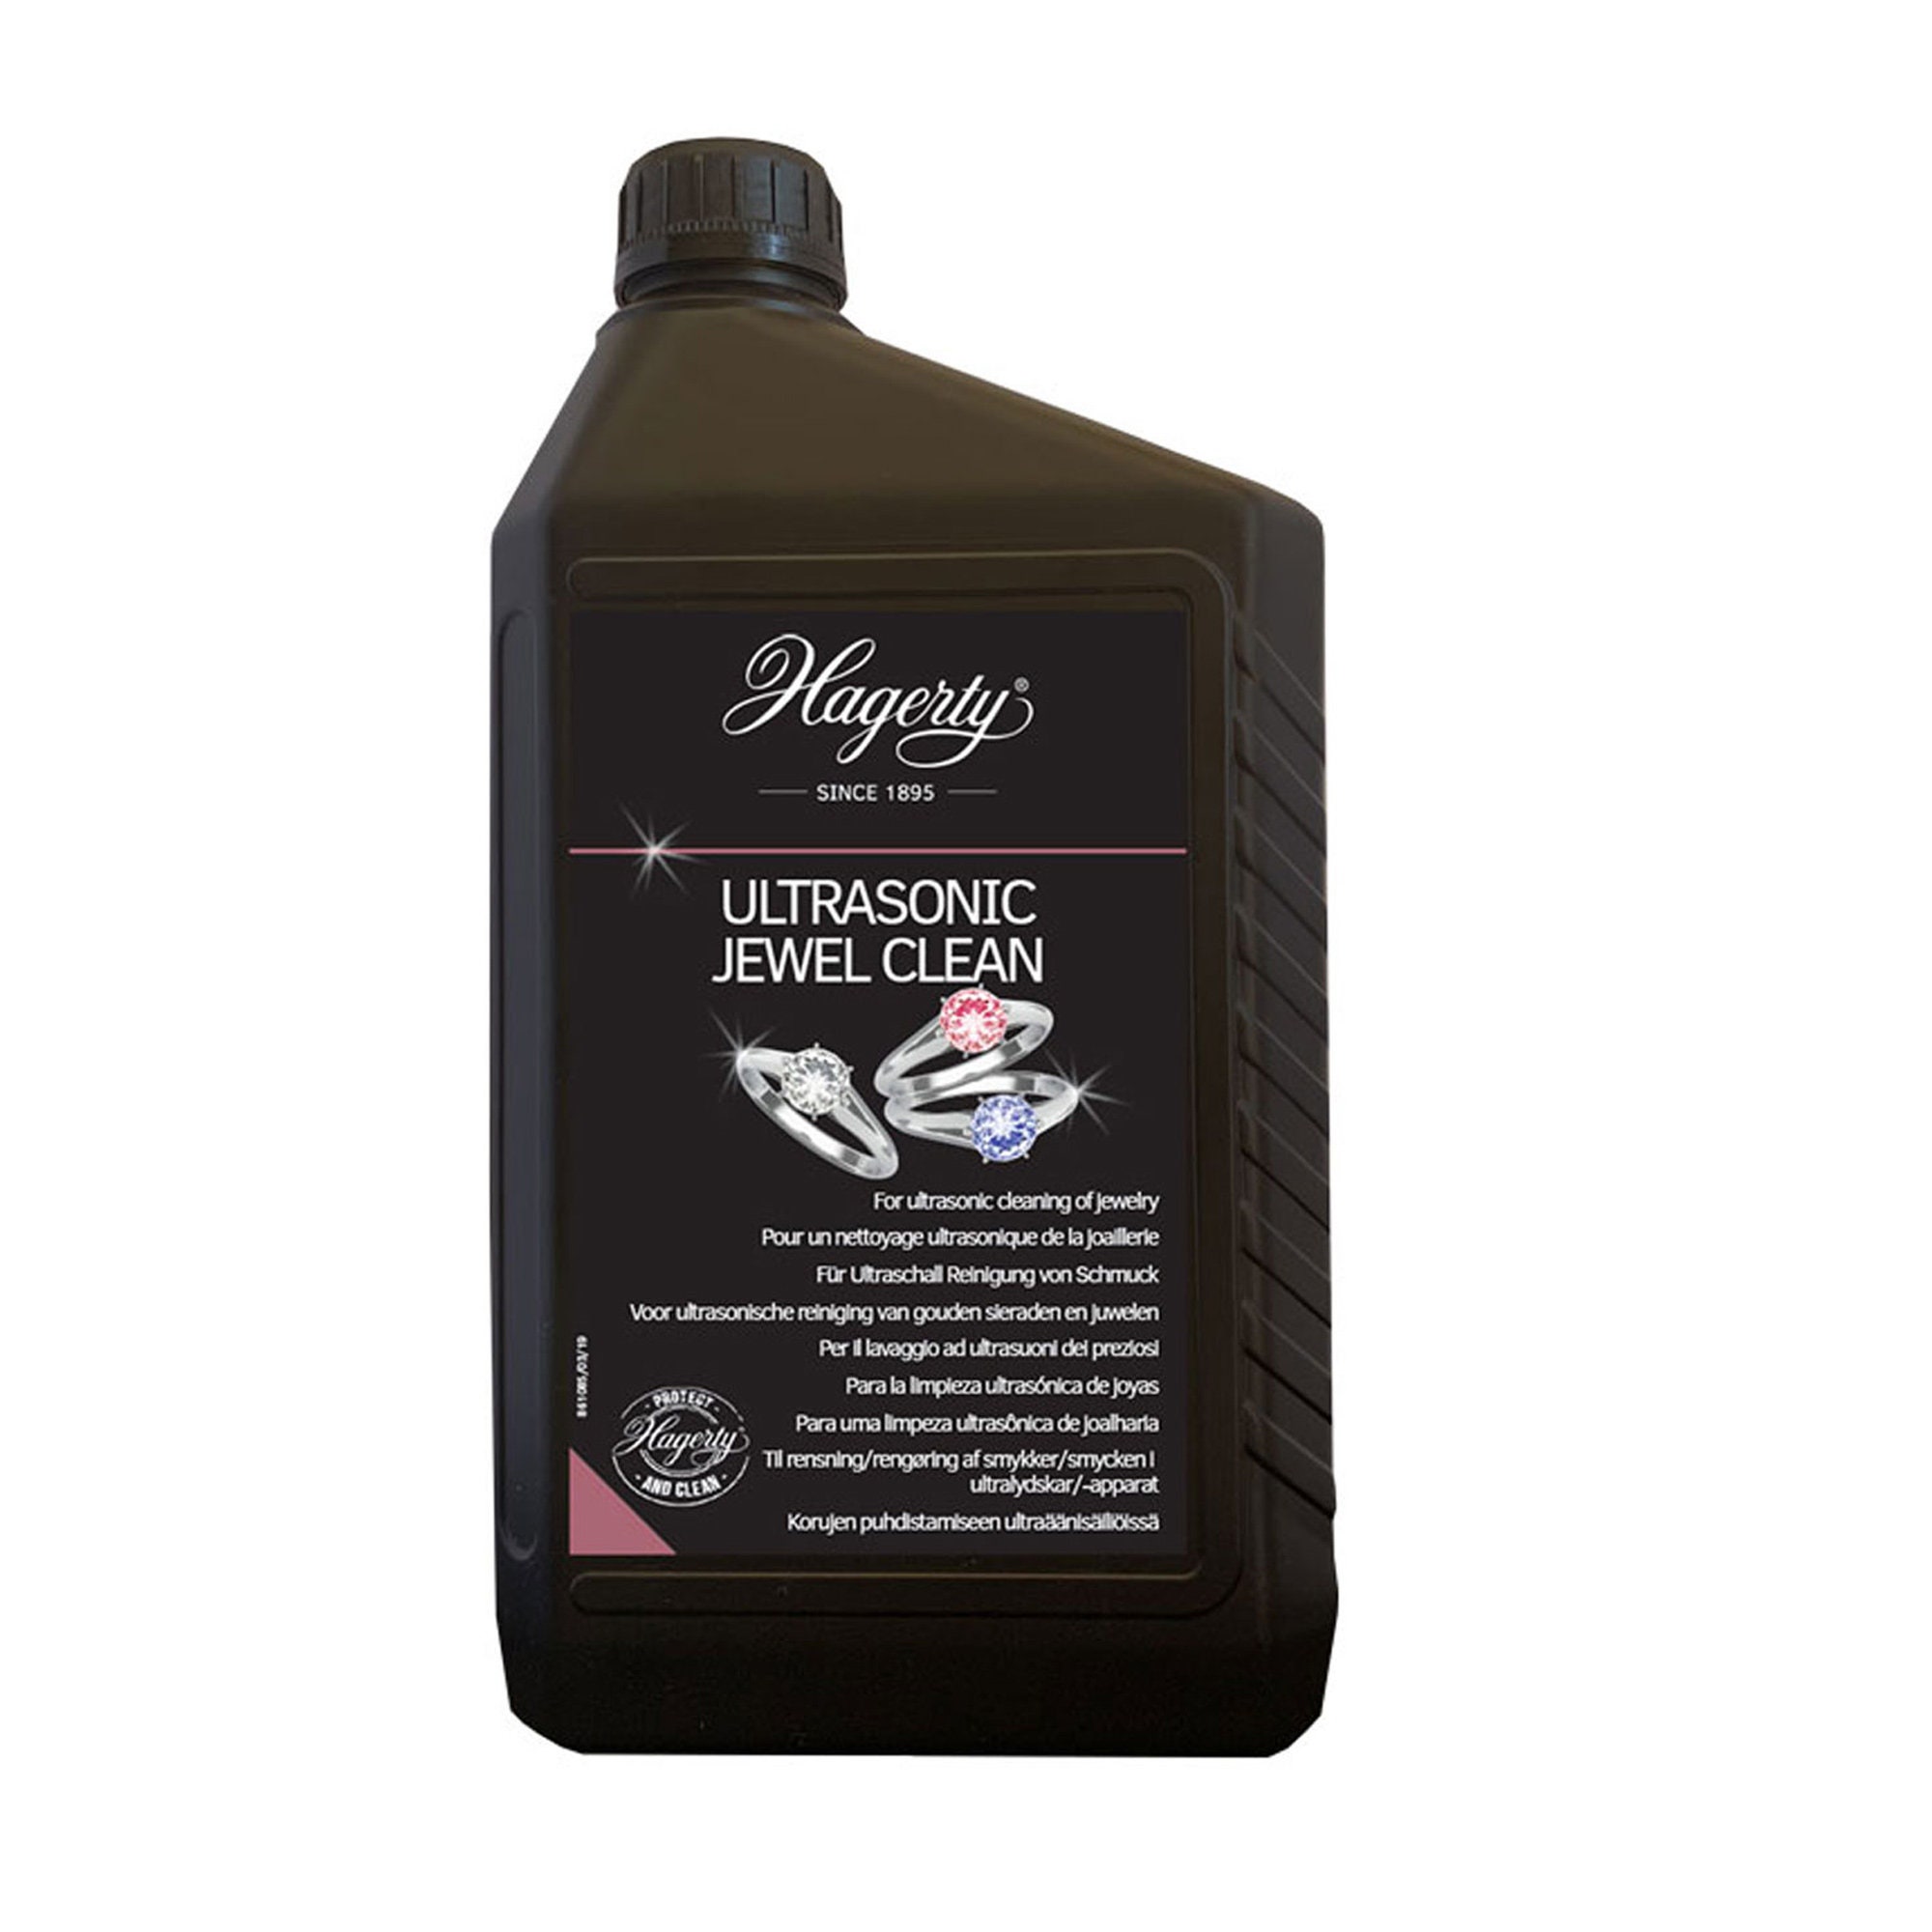 Eurosonic Jewelry Cleaning Solution - 1 Gallon (Non-Toxic, Biodegradable) ,  CLN-850.15